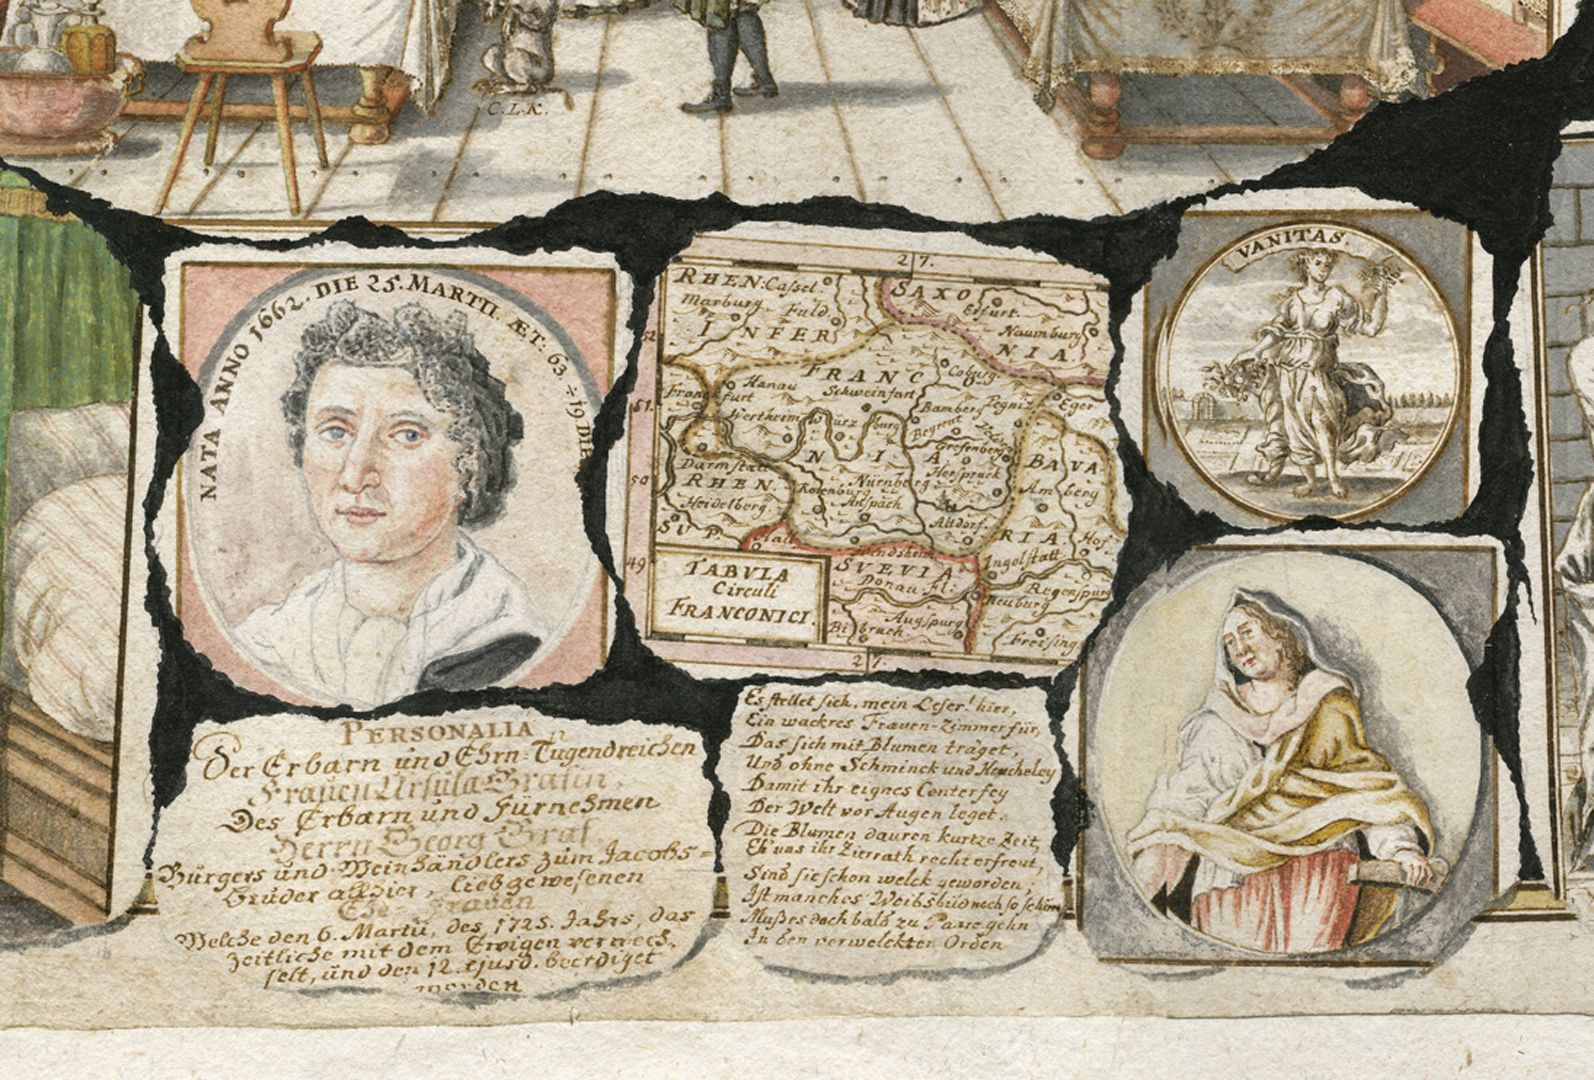 Quodlibet on the death of the wine merchant Graff Middle lower group of "Quodlibetnotes". On the lower left, the death notice of Georg Graff's wife and above her portrait with her year of birth and age at the time of depiction.